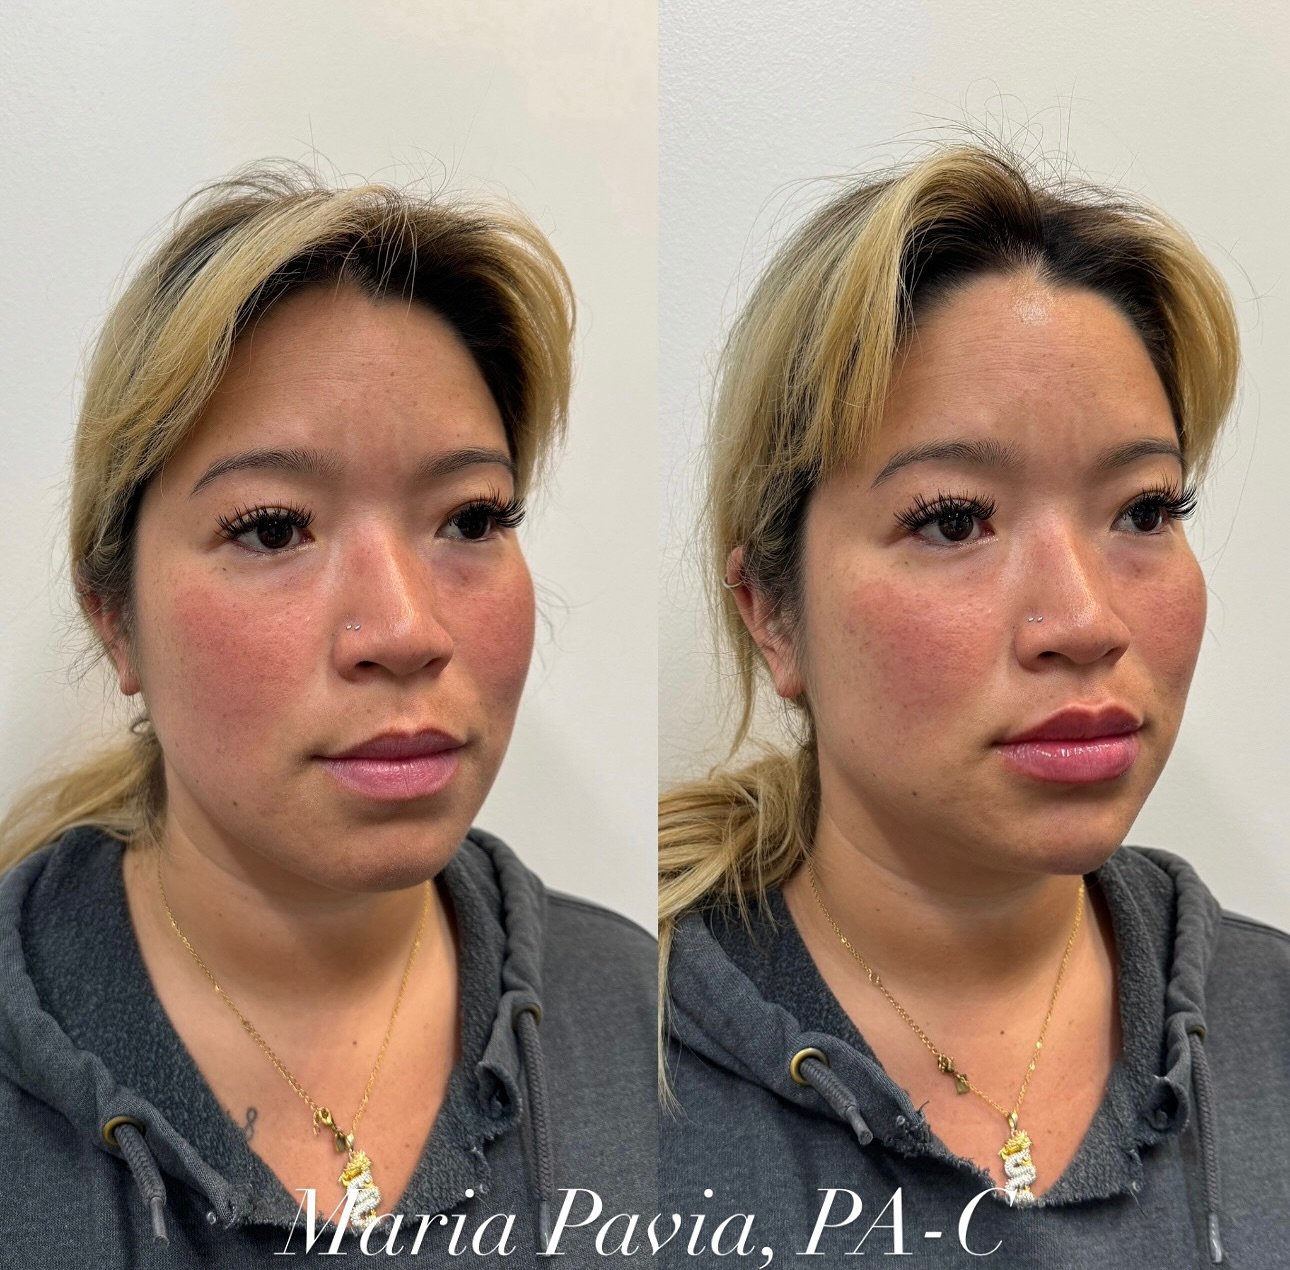 An ✨ENHANCEMENT✨ for my BEAUTIFUL patient🩶

We treated the following areas:
🌟 MIDFACE
🌟 MEDIAL &amp; LATERAL CHEEK
🌟 CHIN &amp; CHADOWS
🌟 LIPS 👄
🌟 &amp; BOTOX

📲 Call/Text (248)924-4058 to book

#LipFiller #FacialBalancing #MidFaceFillers #Fi